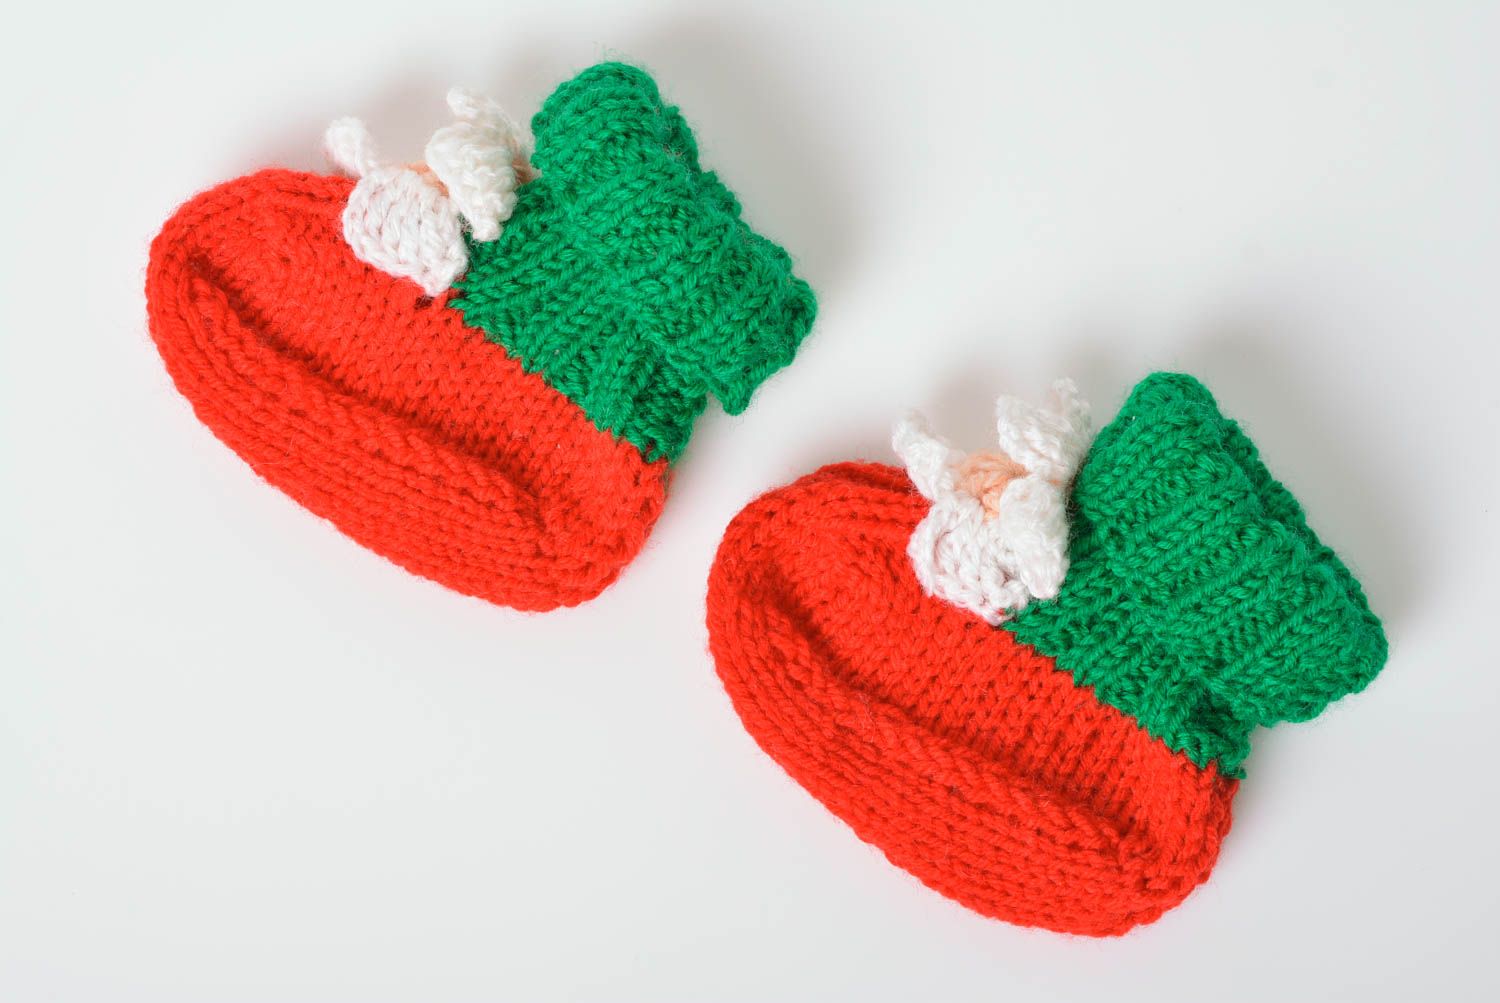 Handmade knitted baby booties made of wool winter socks for small children photo 4